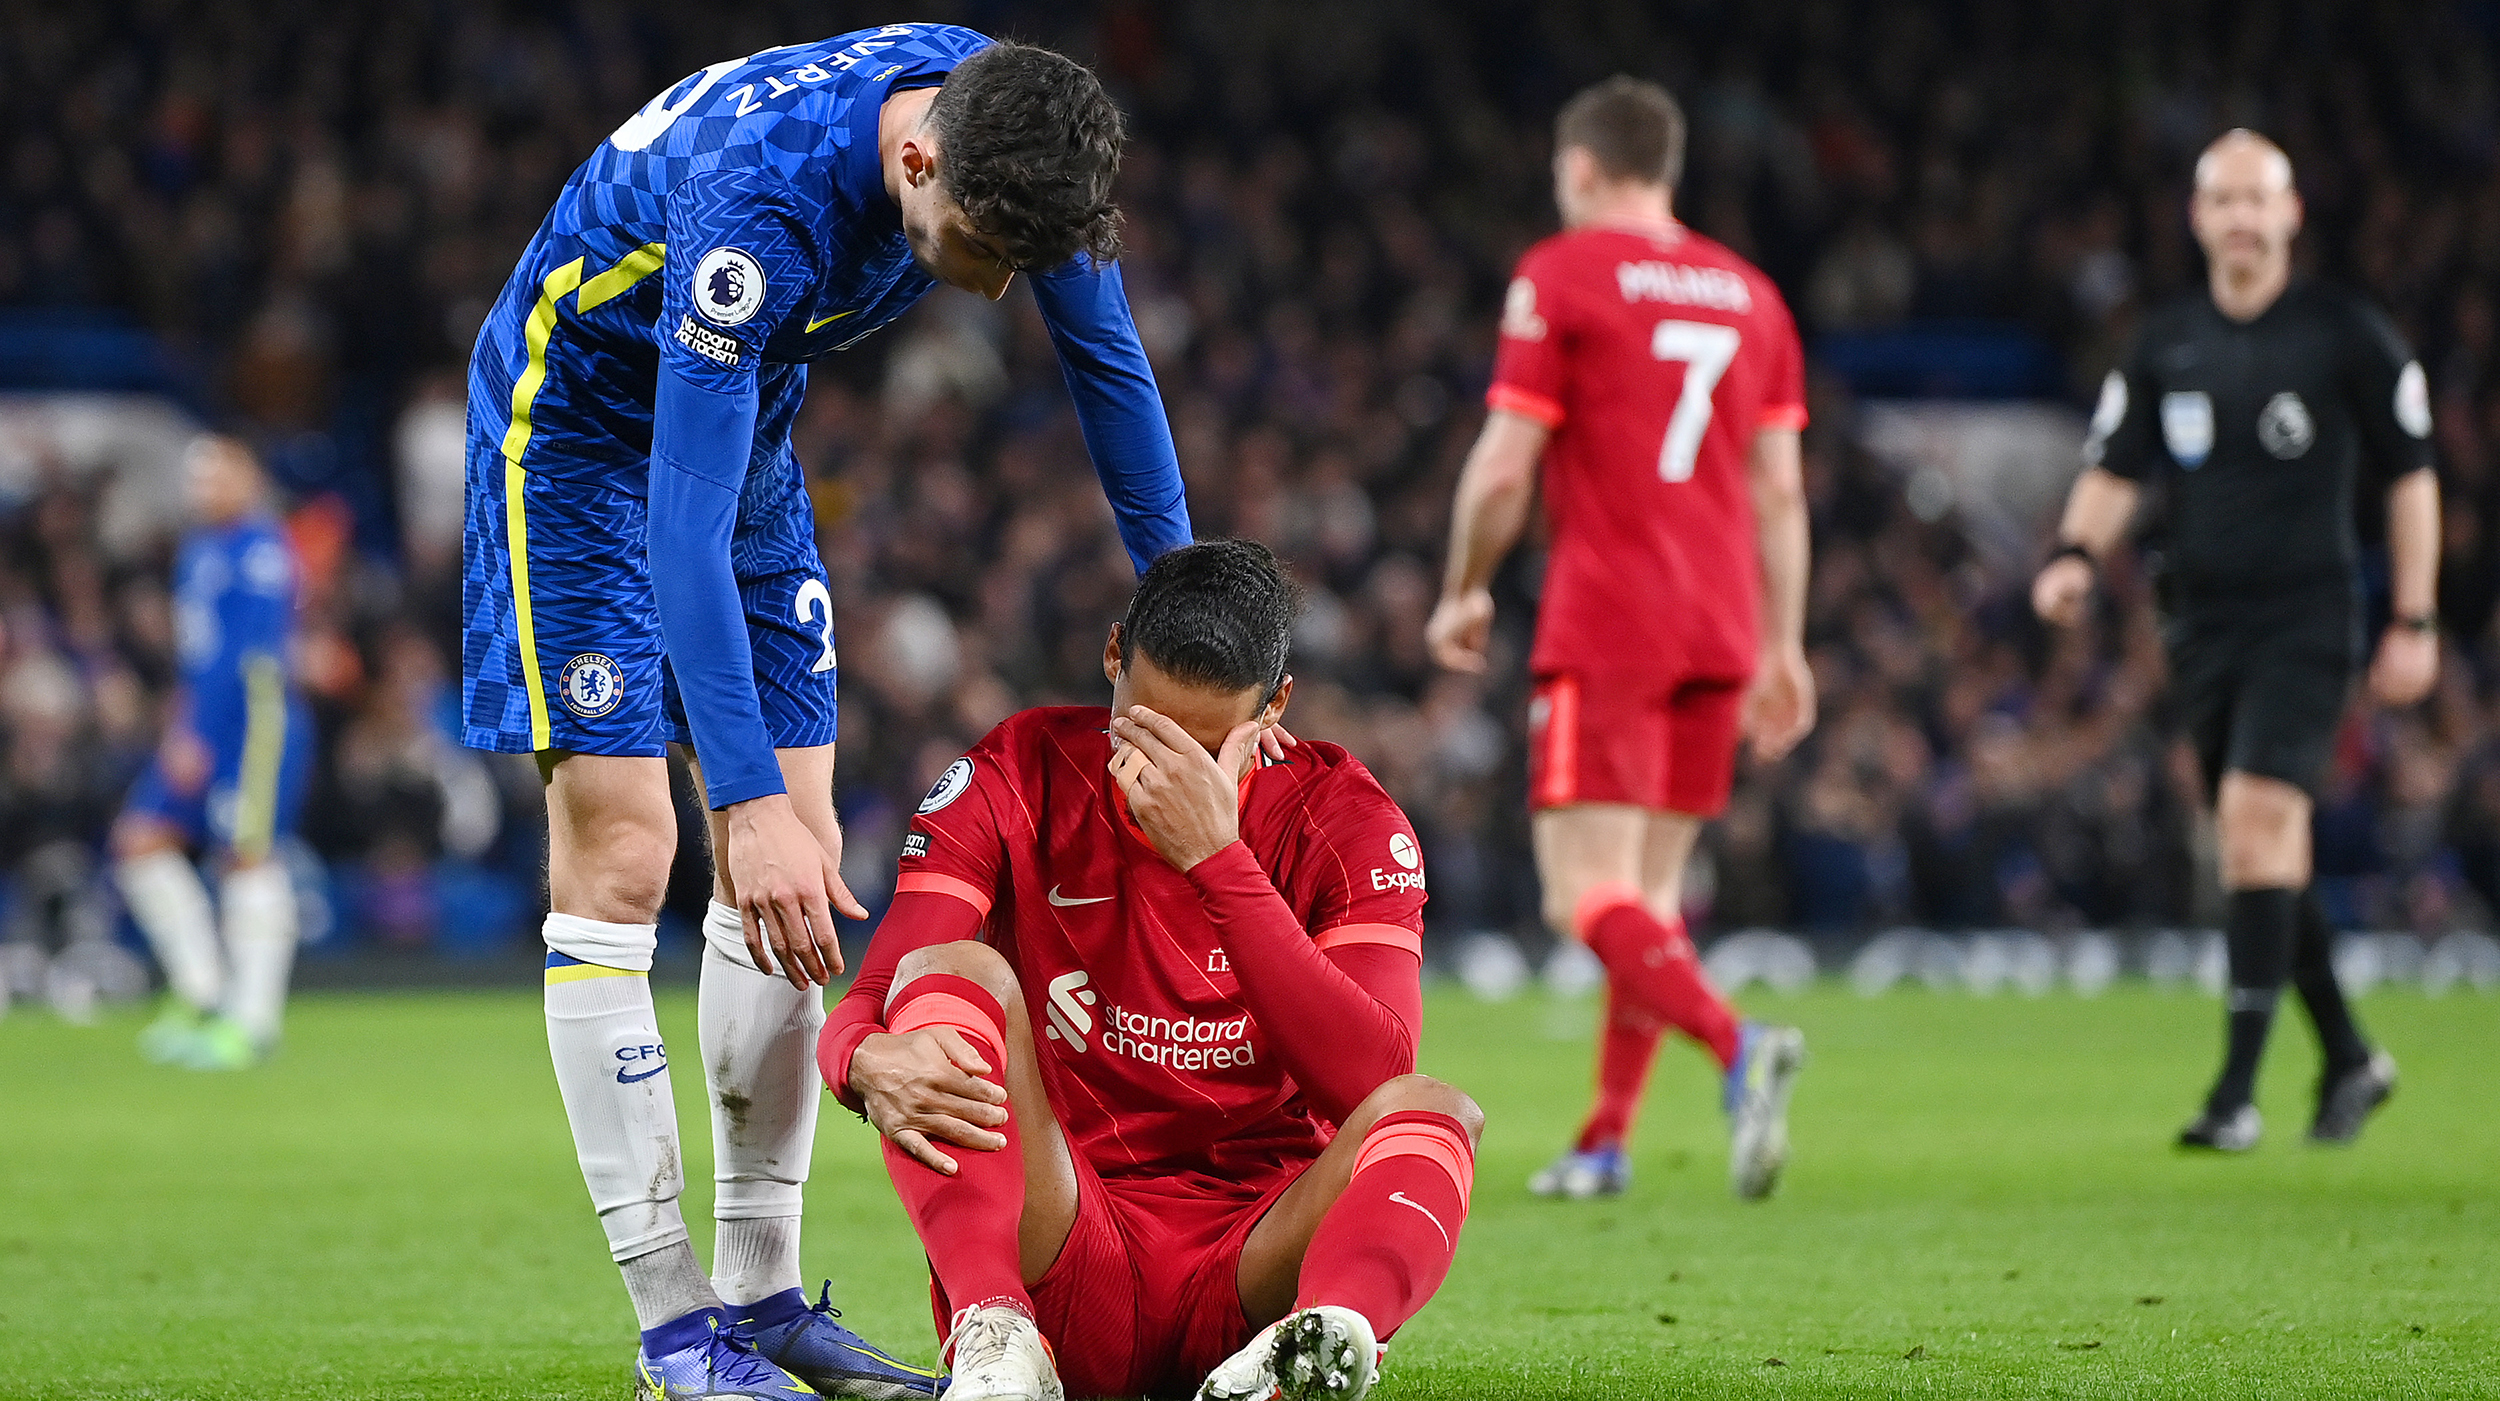 Kai Havertz of Chelsea interacts with Virgil van Dijk of Liverpool during the Premier League match between Chelsea and Liverpool at Stamford Bridge on January 02, 2022 in London, England.